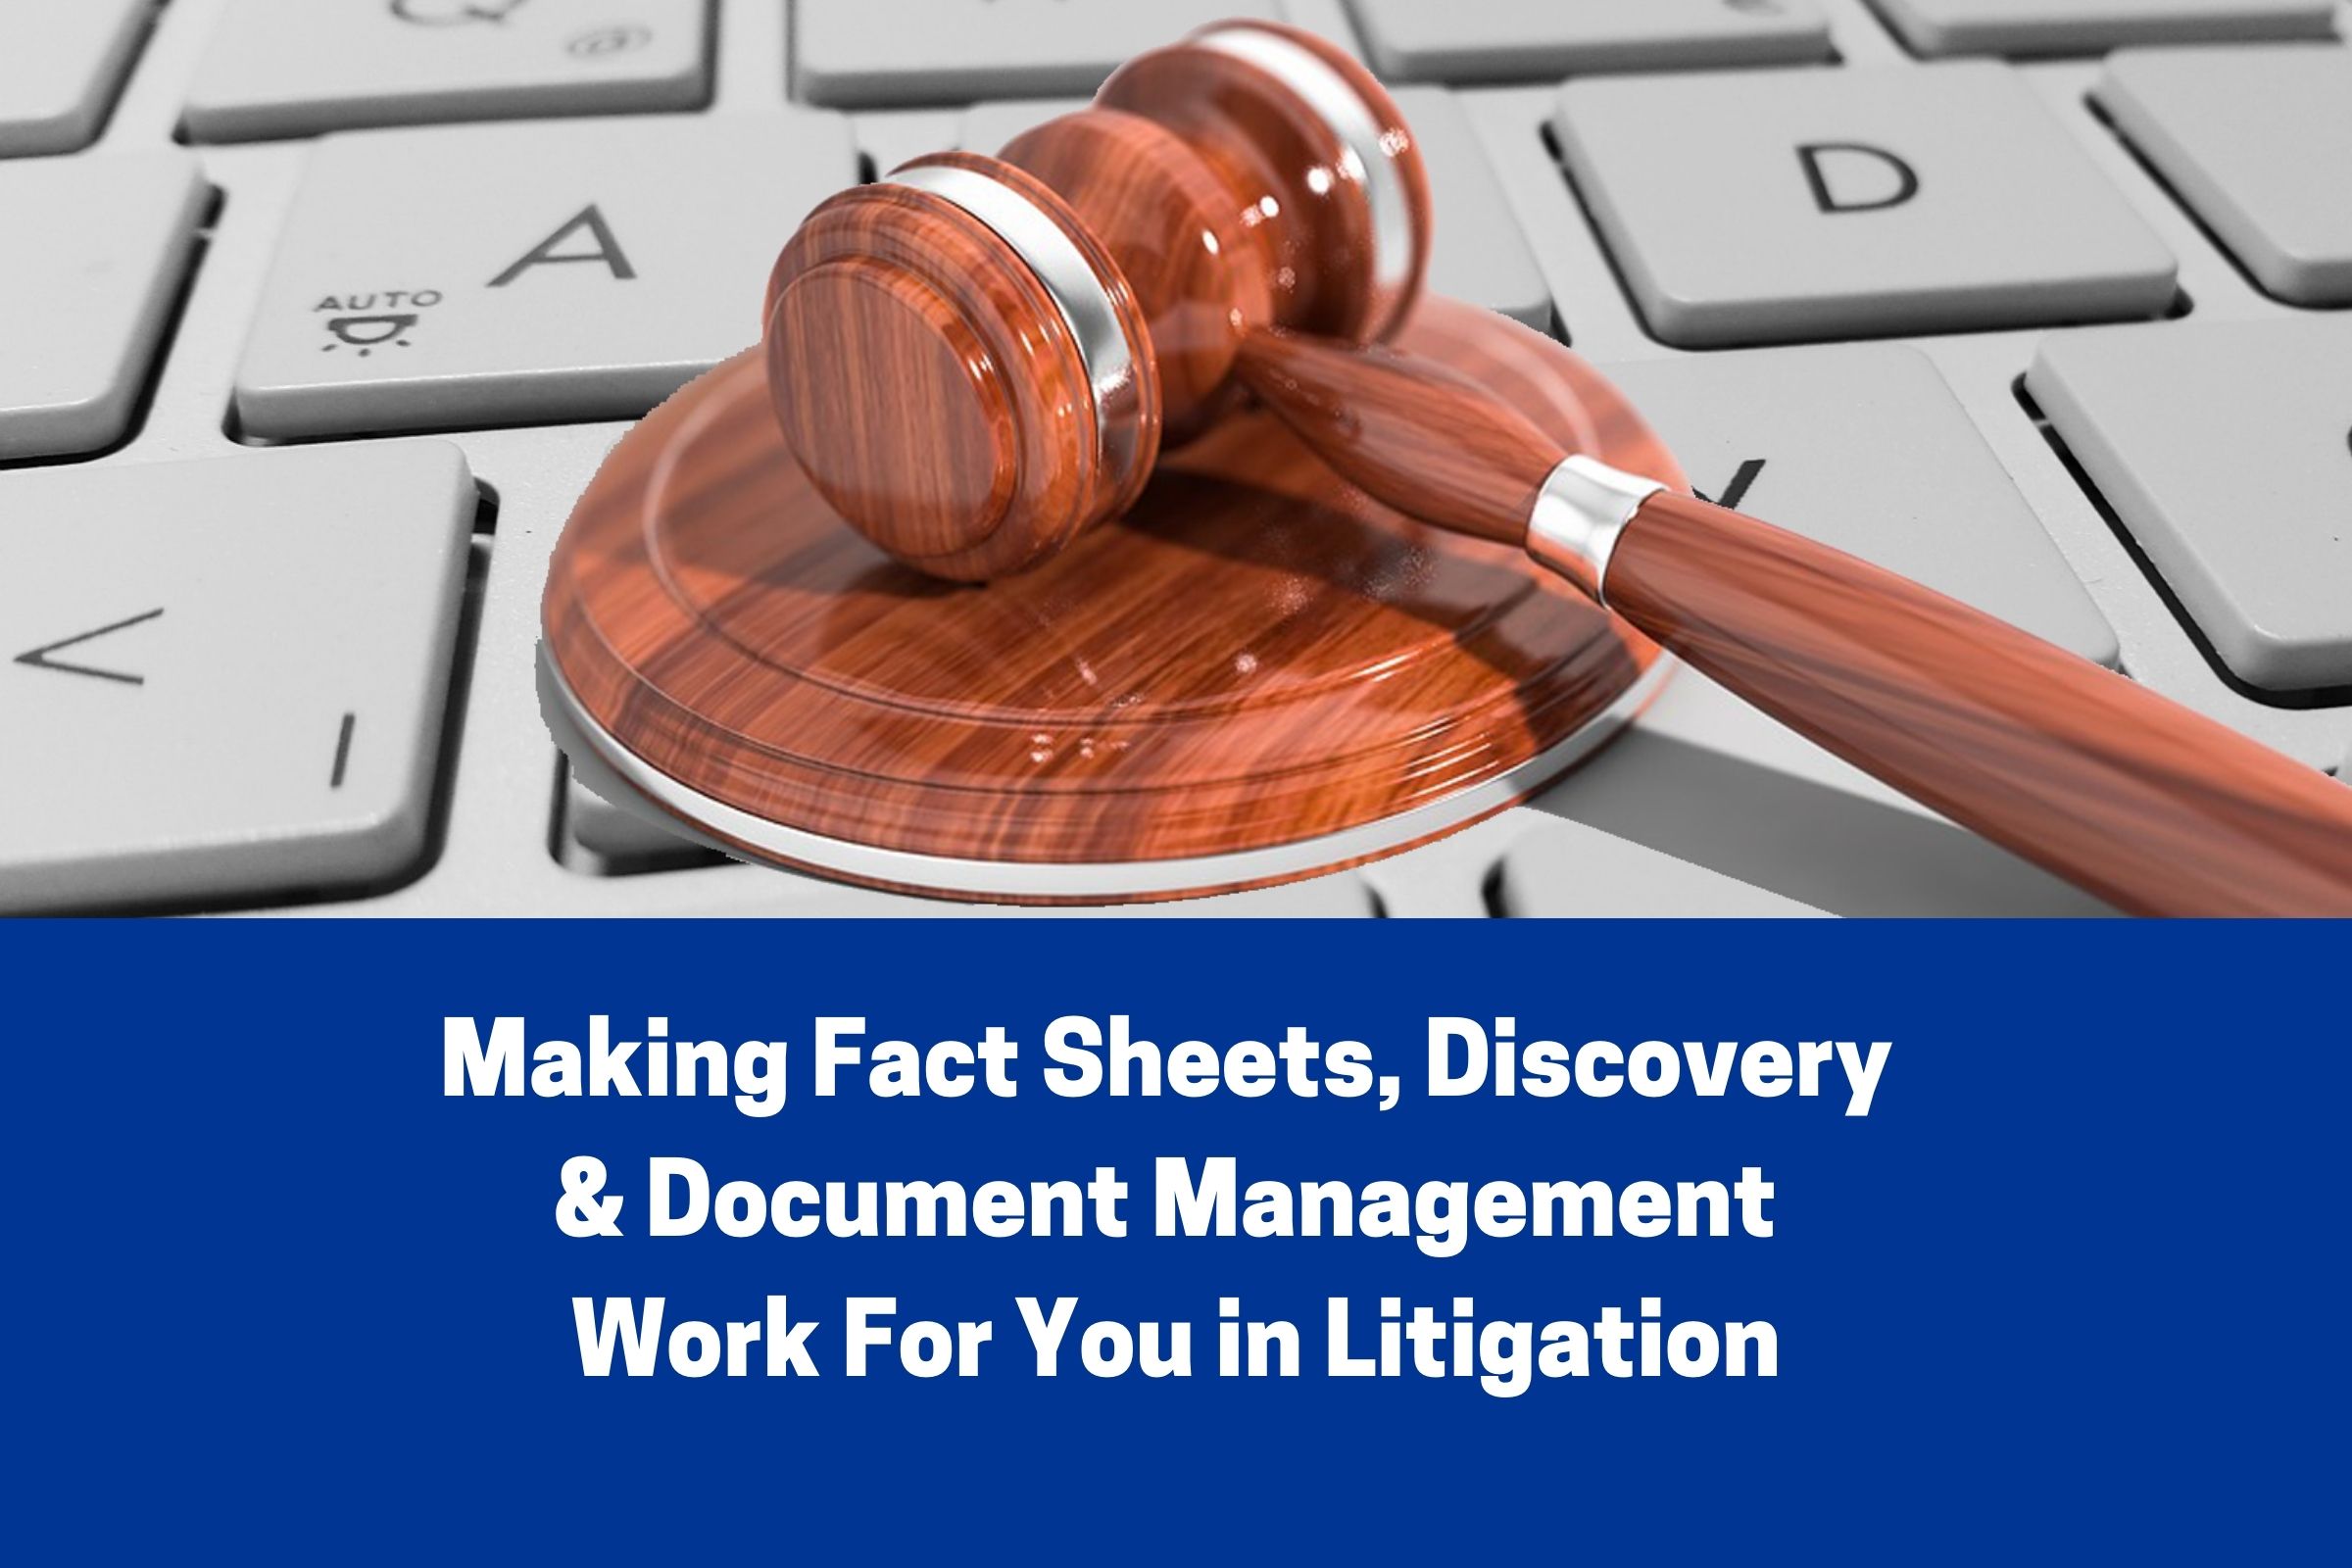 Making Fact Sheets, Discovery and Document Management Work For You in Litigation